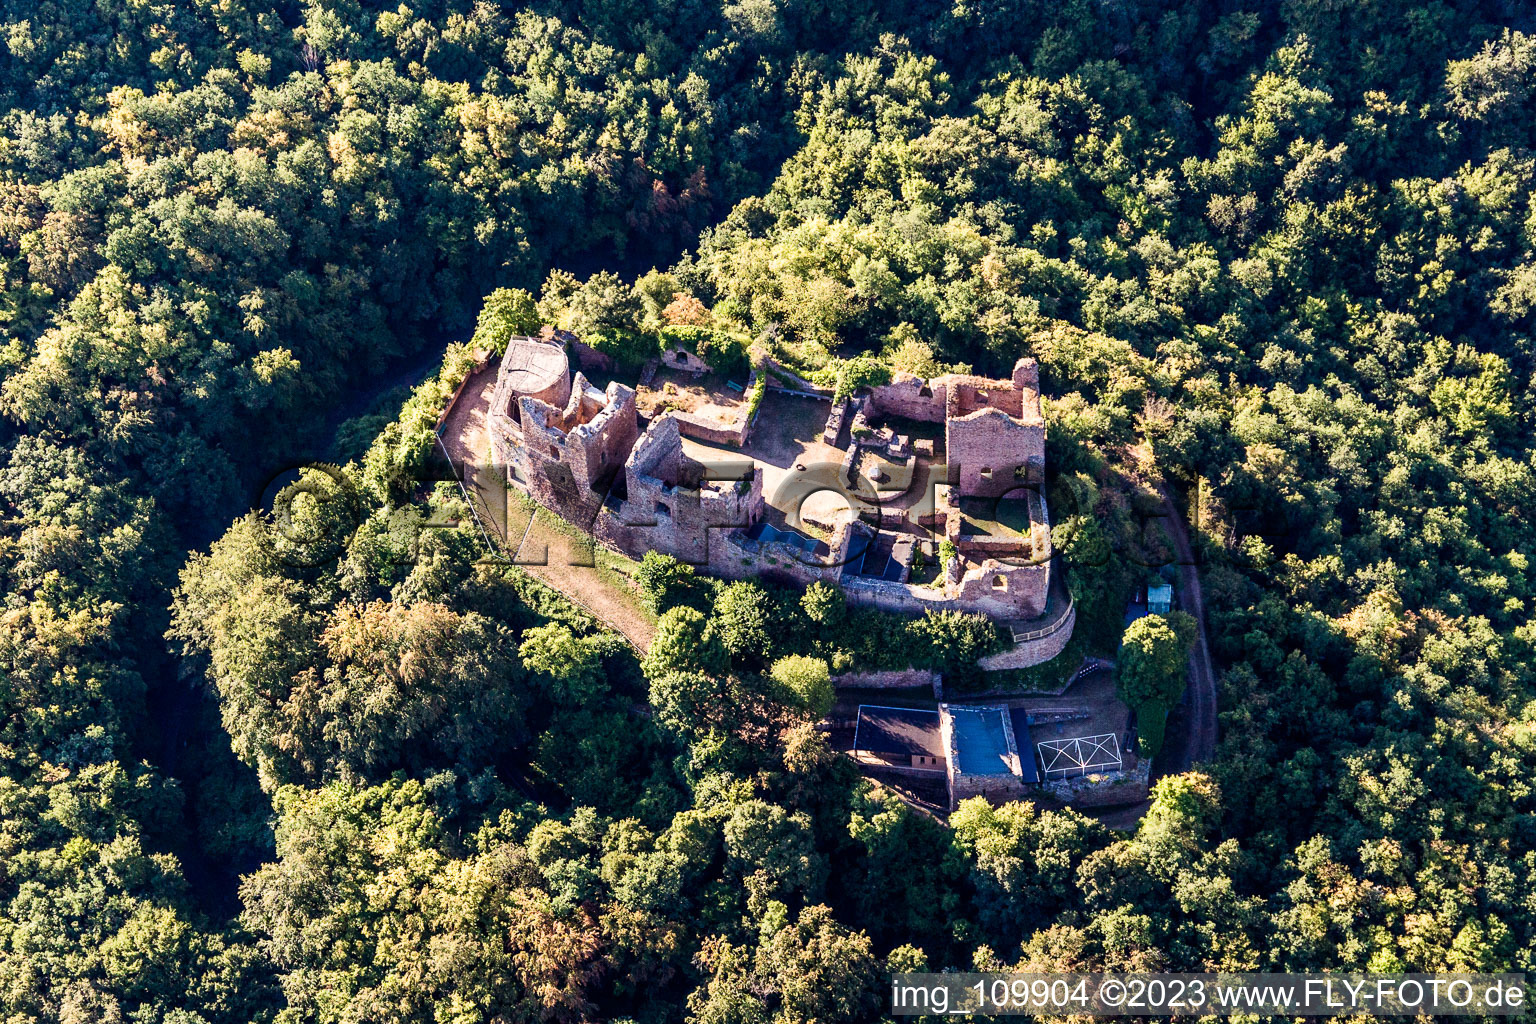 Oblique view of Montfort castle ruins in Hallgarten in the state Rhineland-Palatinate, Germany